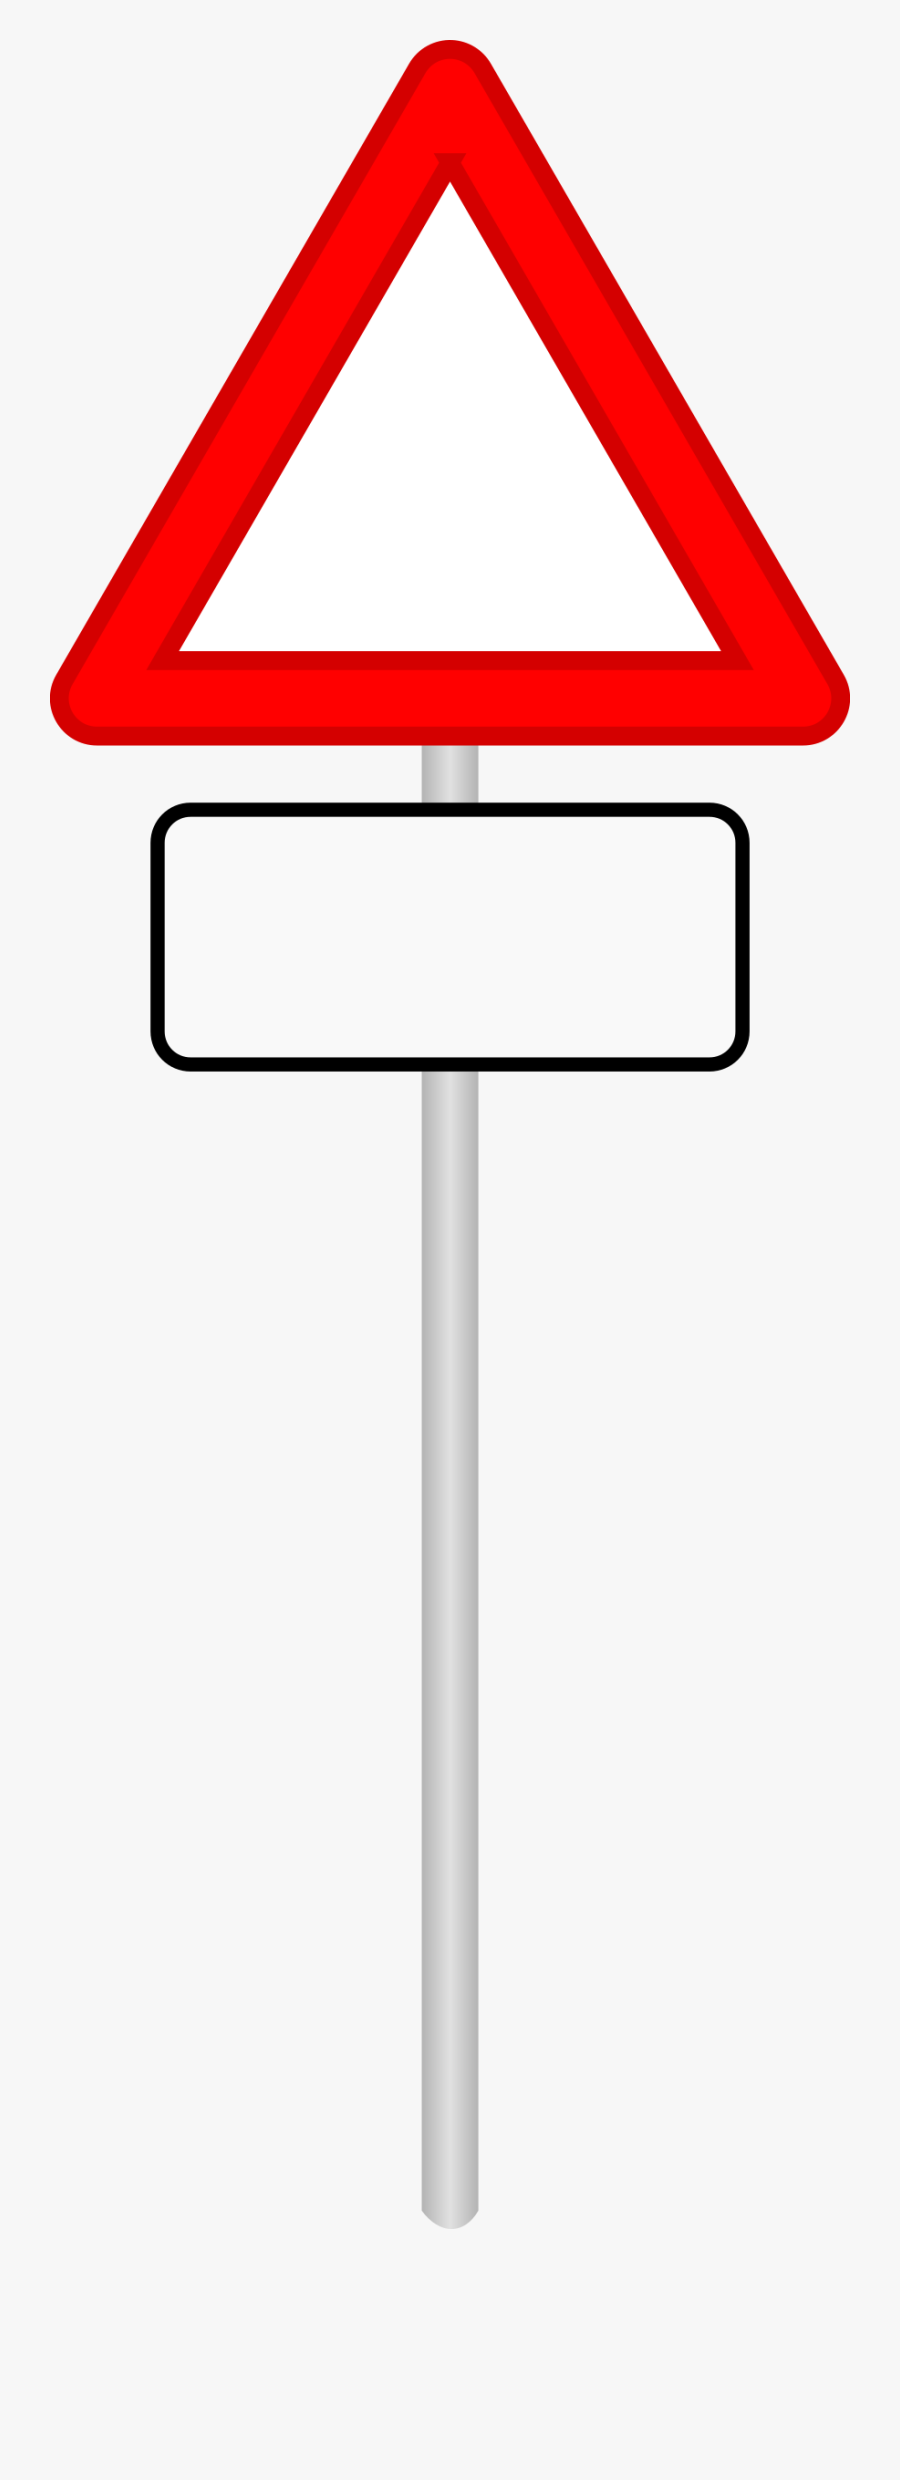 Street Clipart Png - Traffic Sign, Transparent Clipart